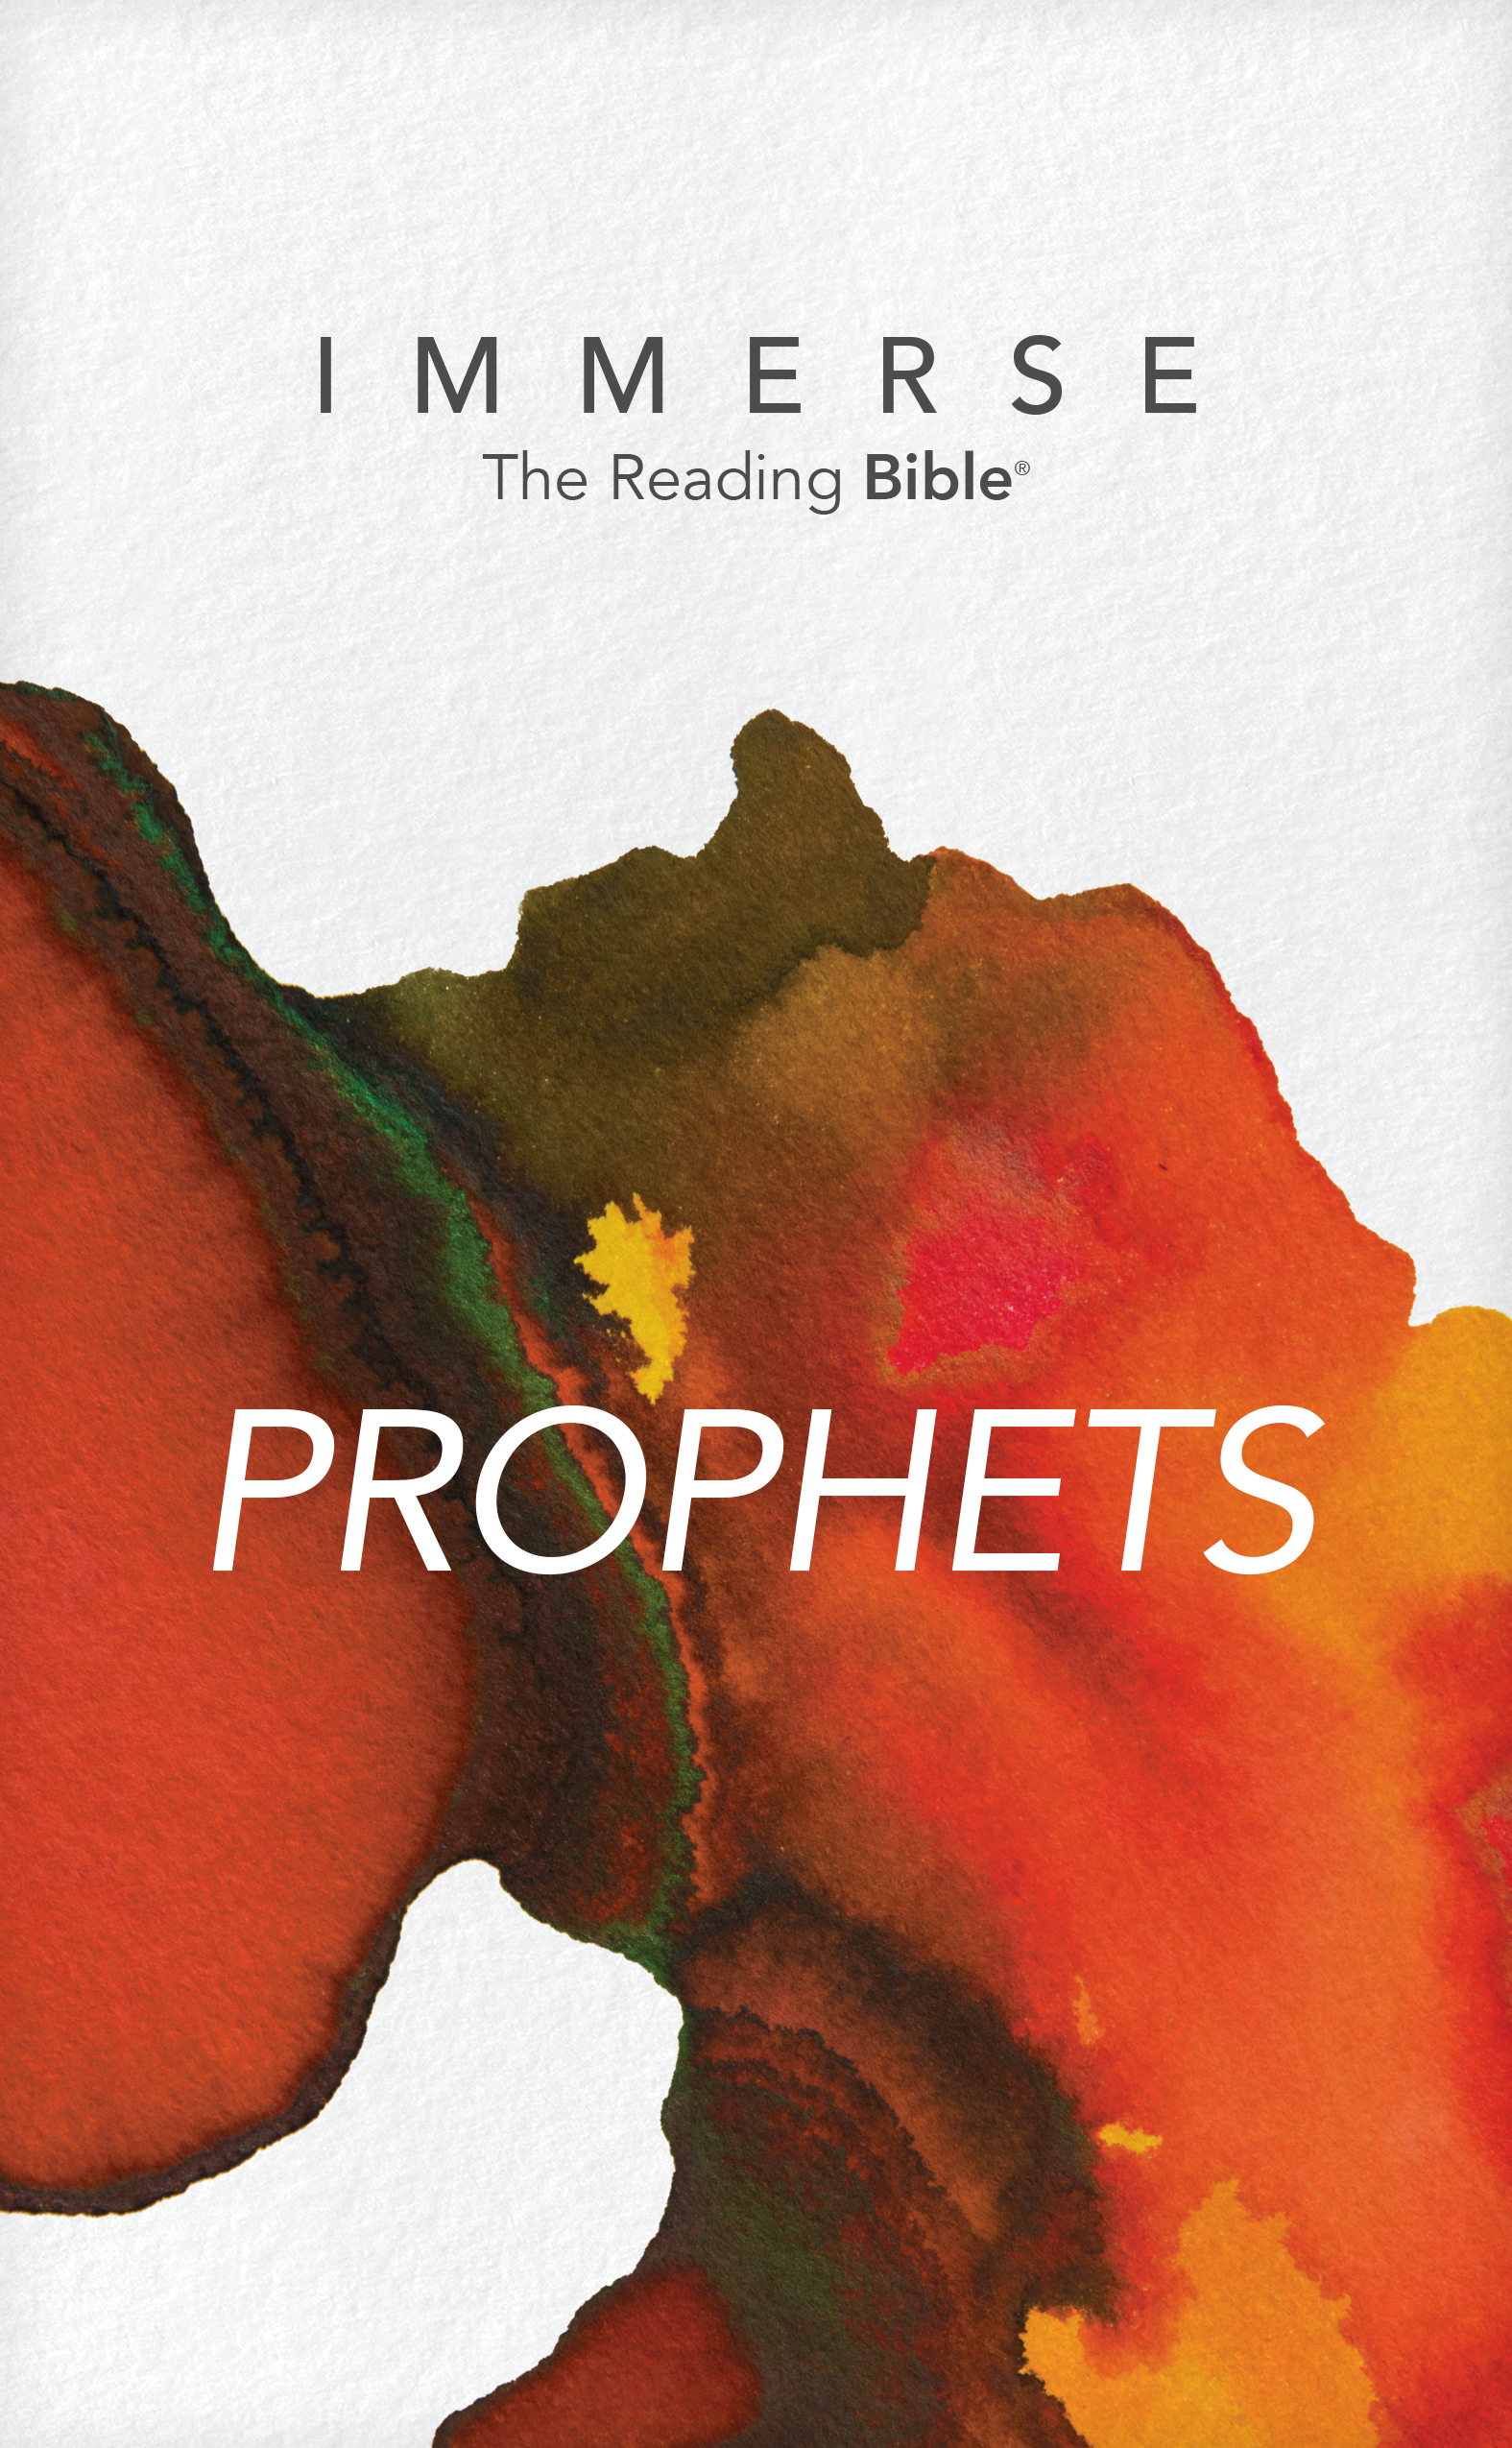 Immerse:　Prophets|　you　Free　at　Delivery　when　spend　pound;10